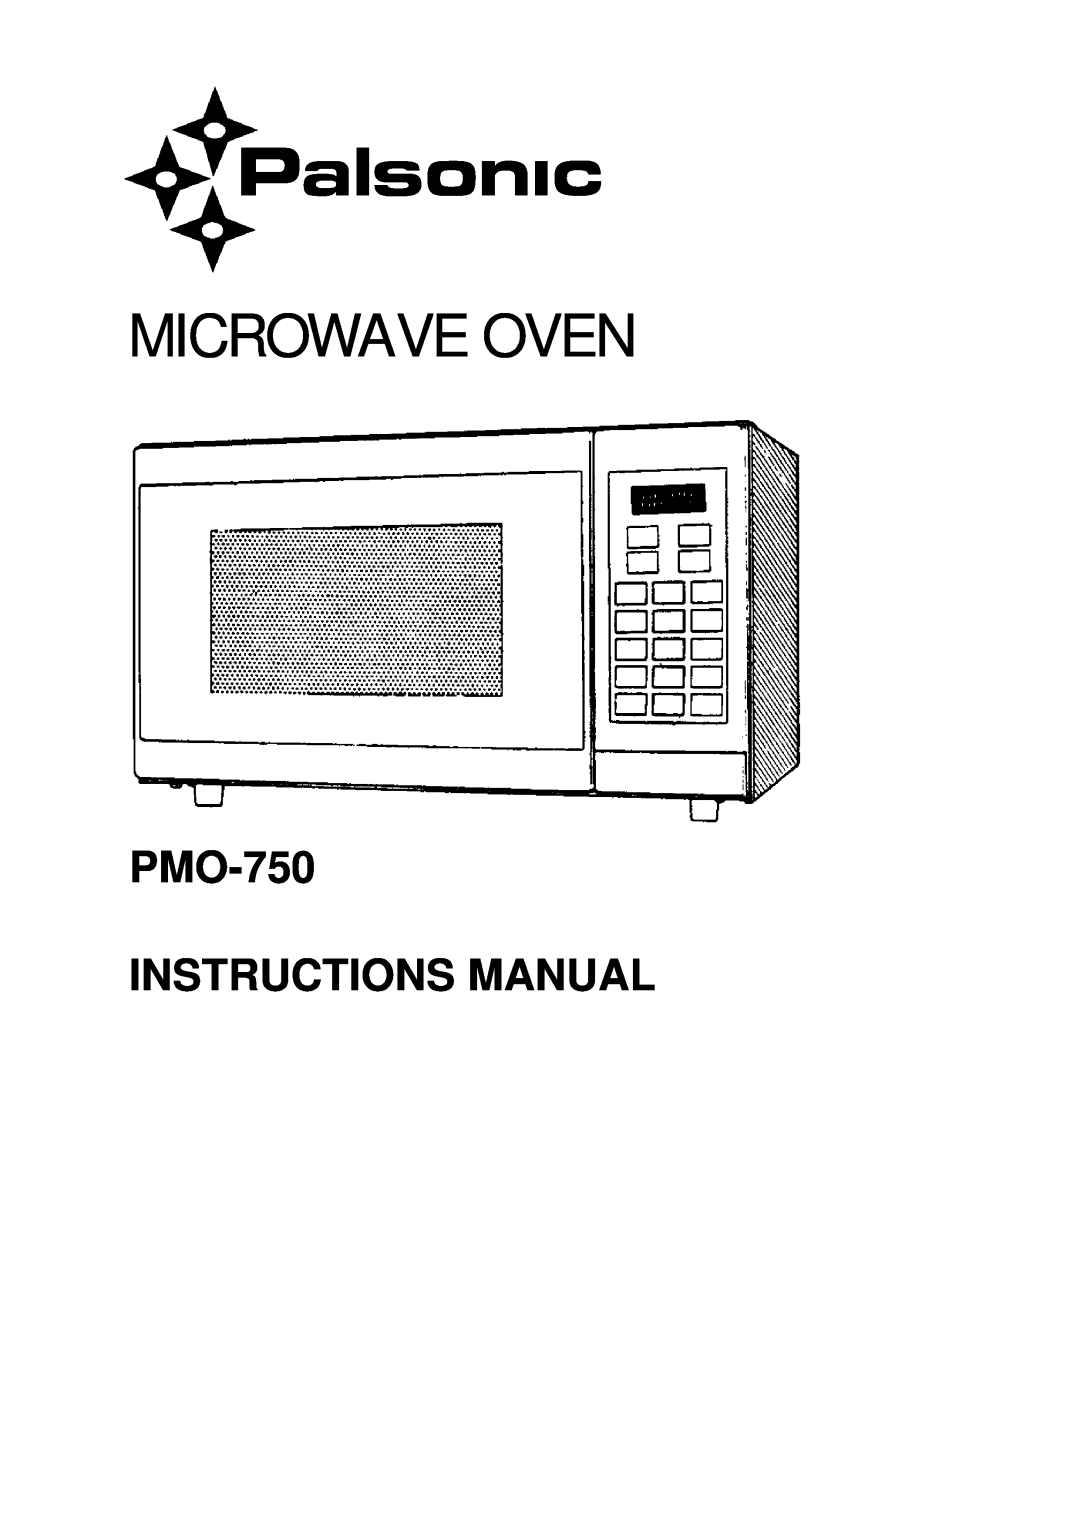 Palsonic manual Microwave Oven, PMO-750 INSTRUCTIONS MANUAL 